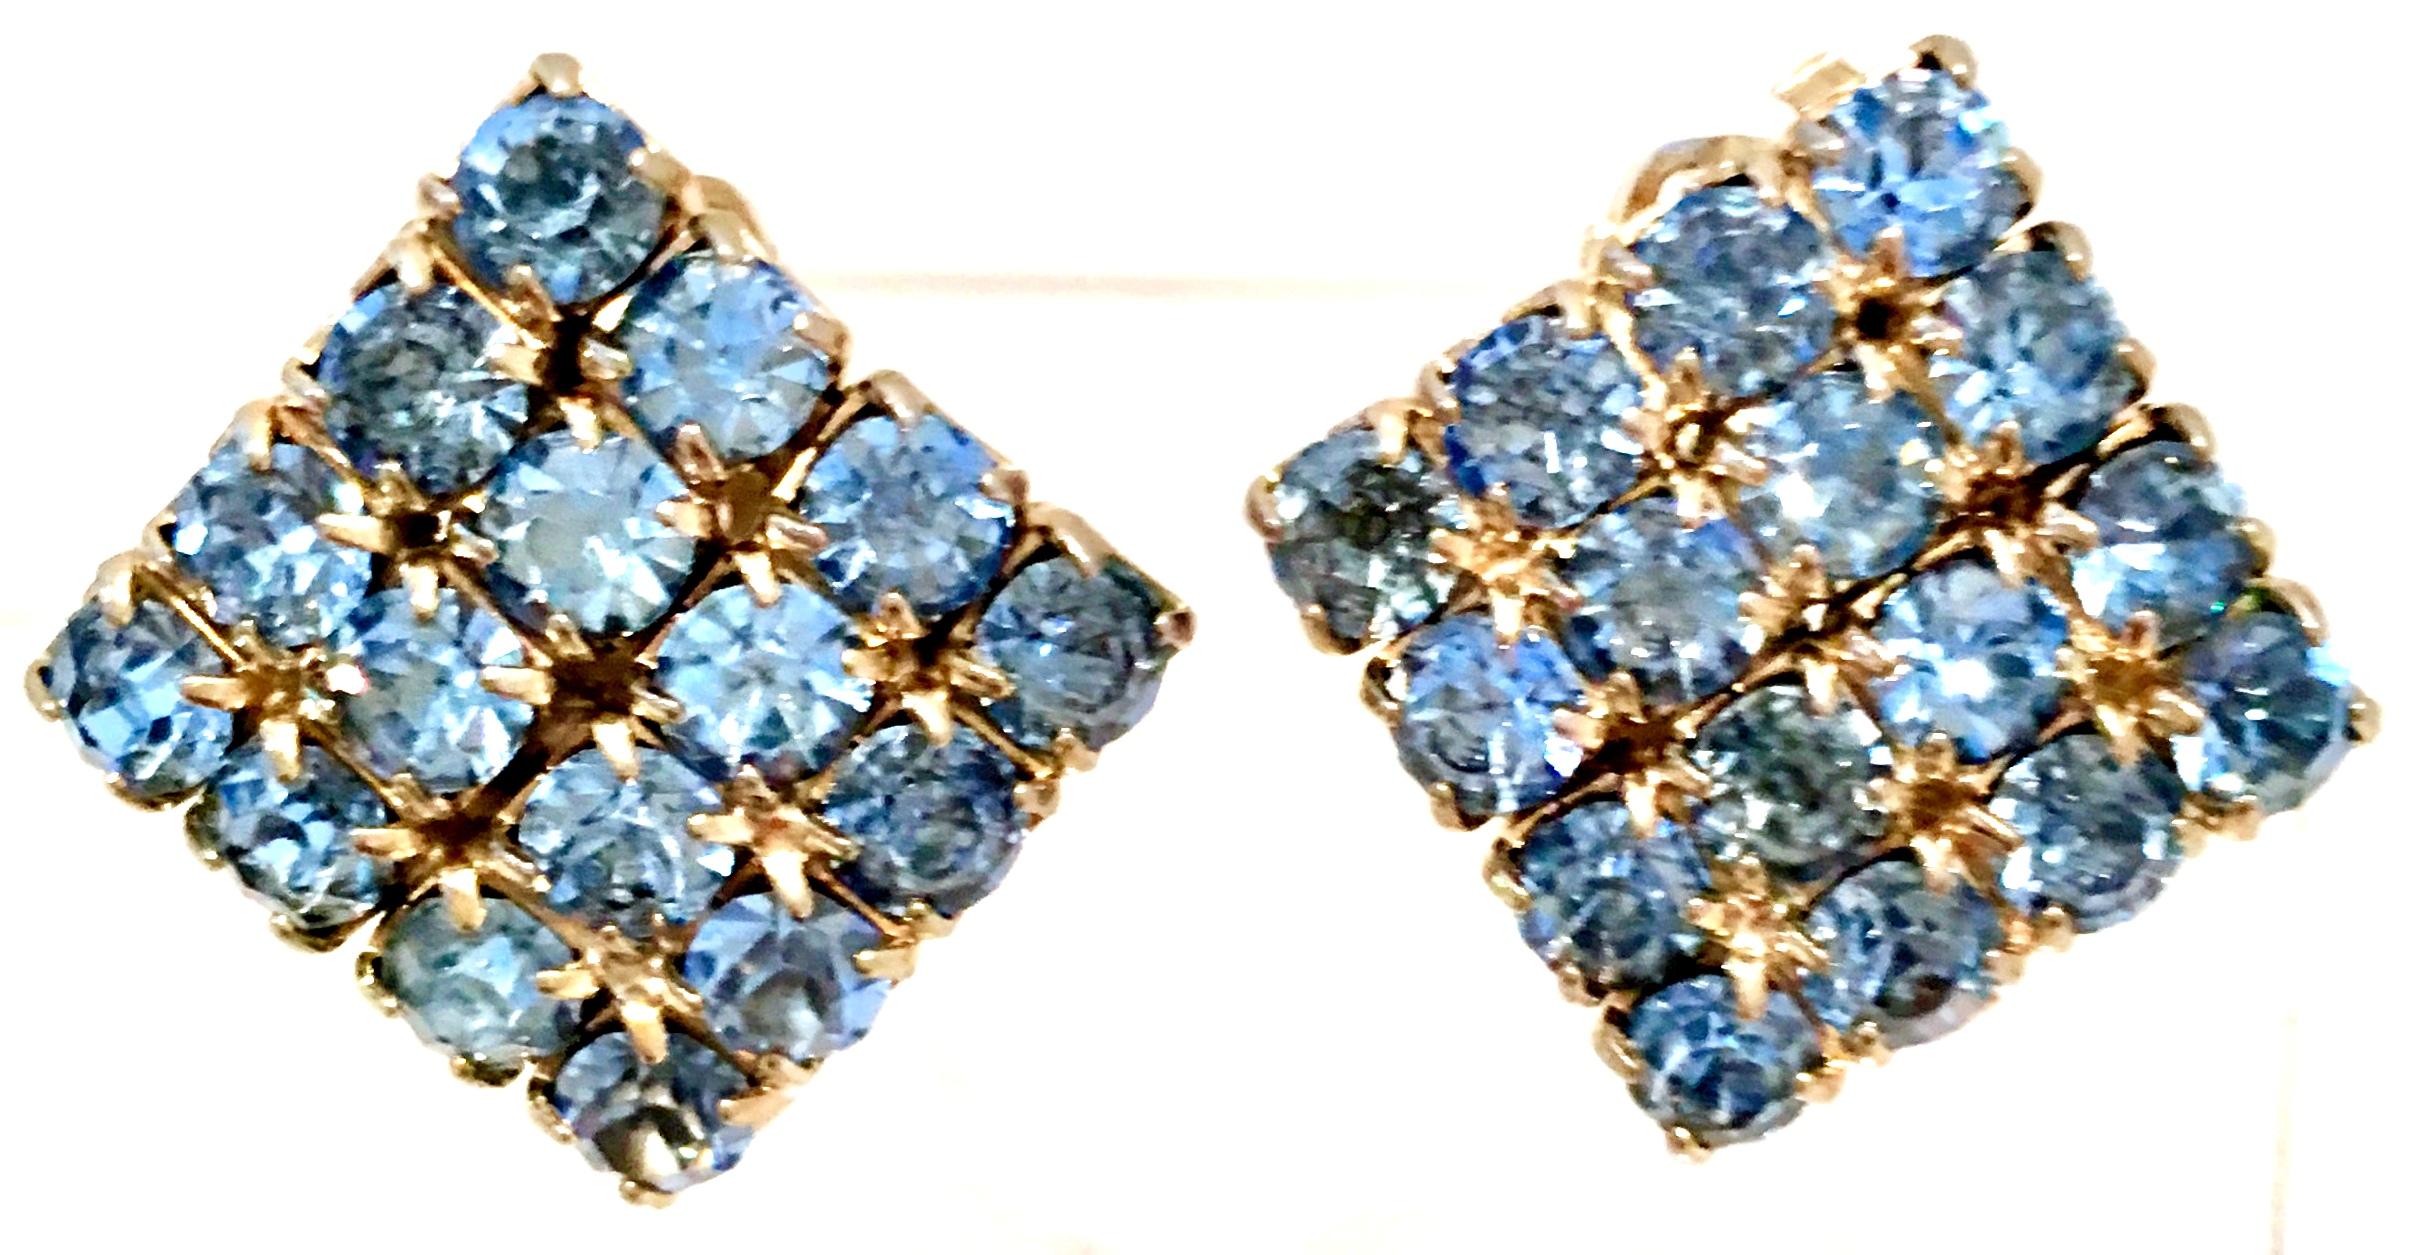 1960'S Gilt Gold Tone Metal & Blue Sapphire Swarovski Crystal Rhinestone Earrings. These clip style prong set earrings feature a triangle shape.